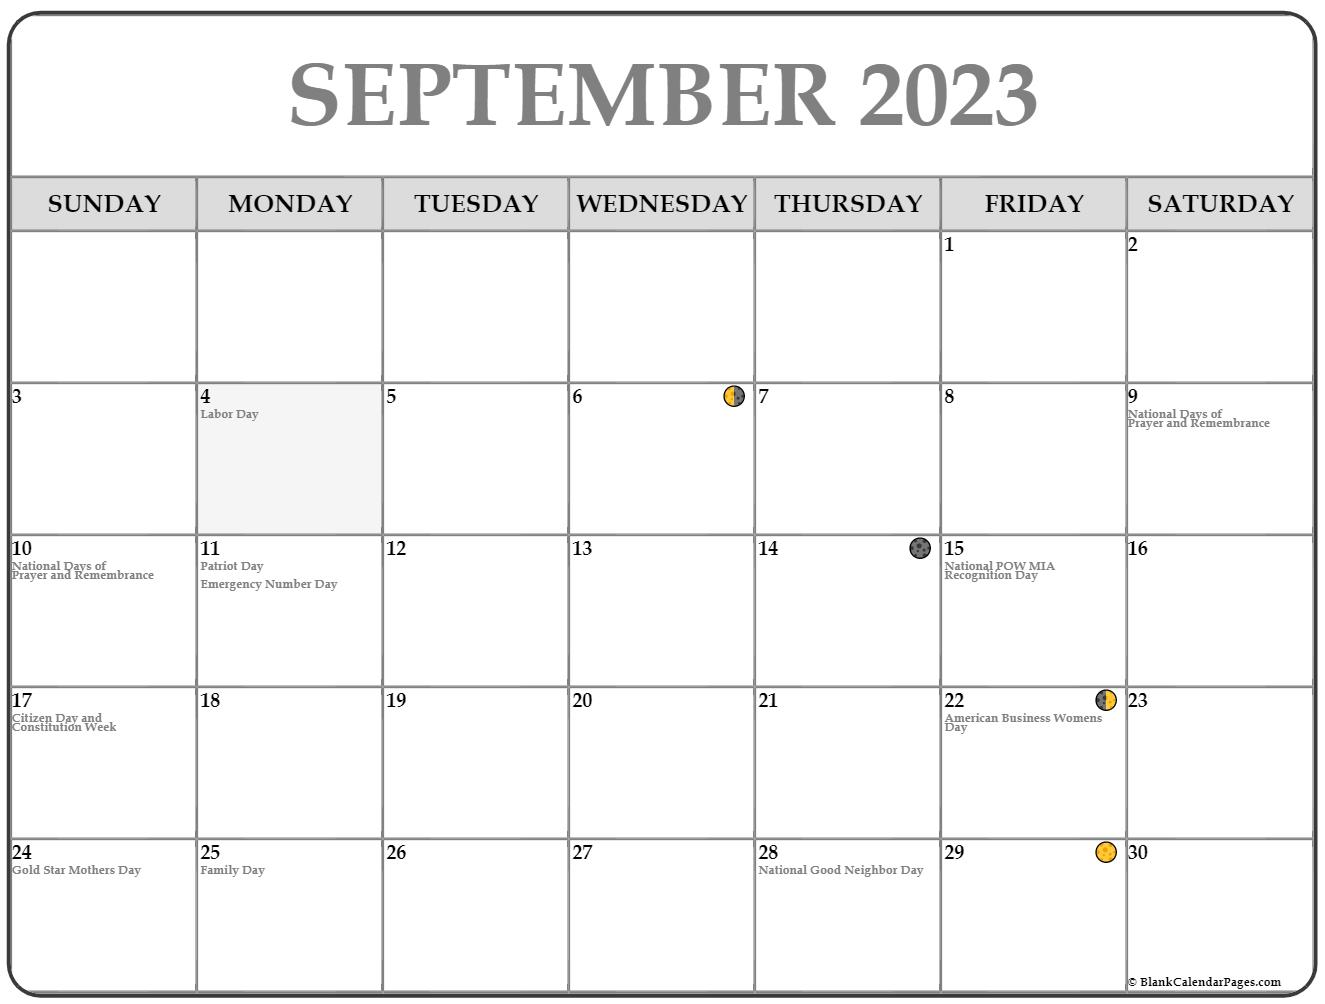 Full Moon Calendar 2023: Which days will have a full moon in 2023?